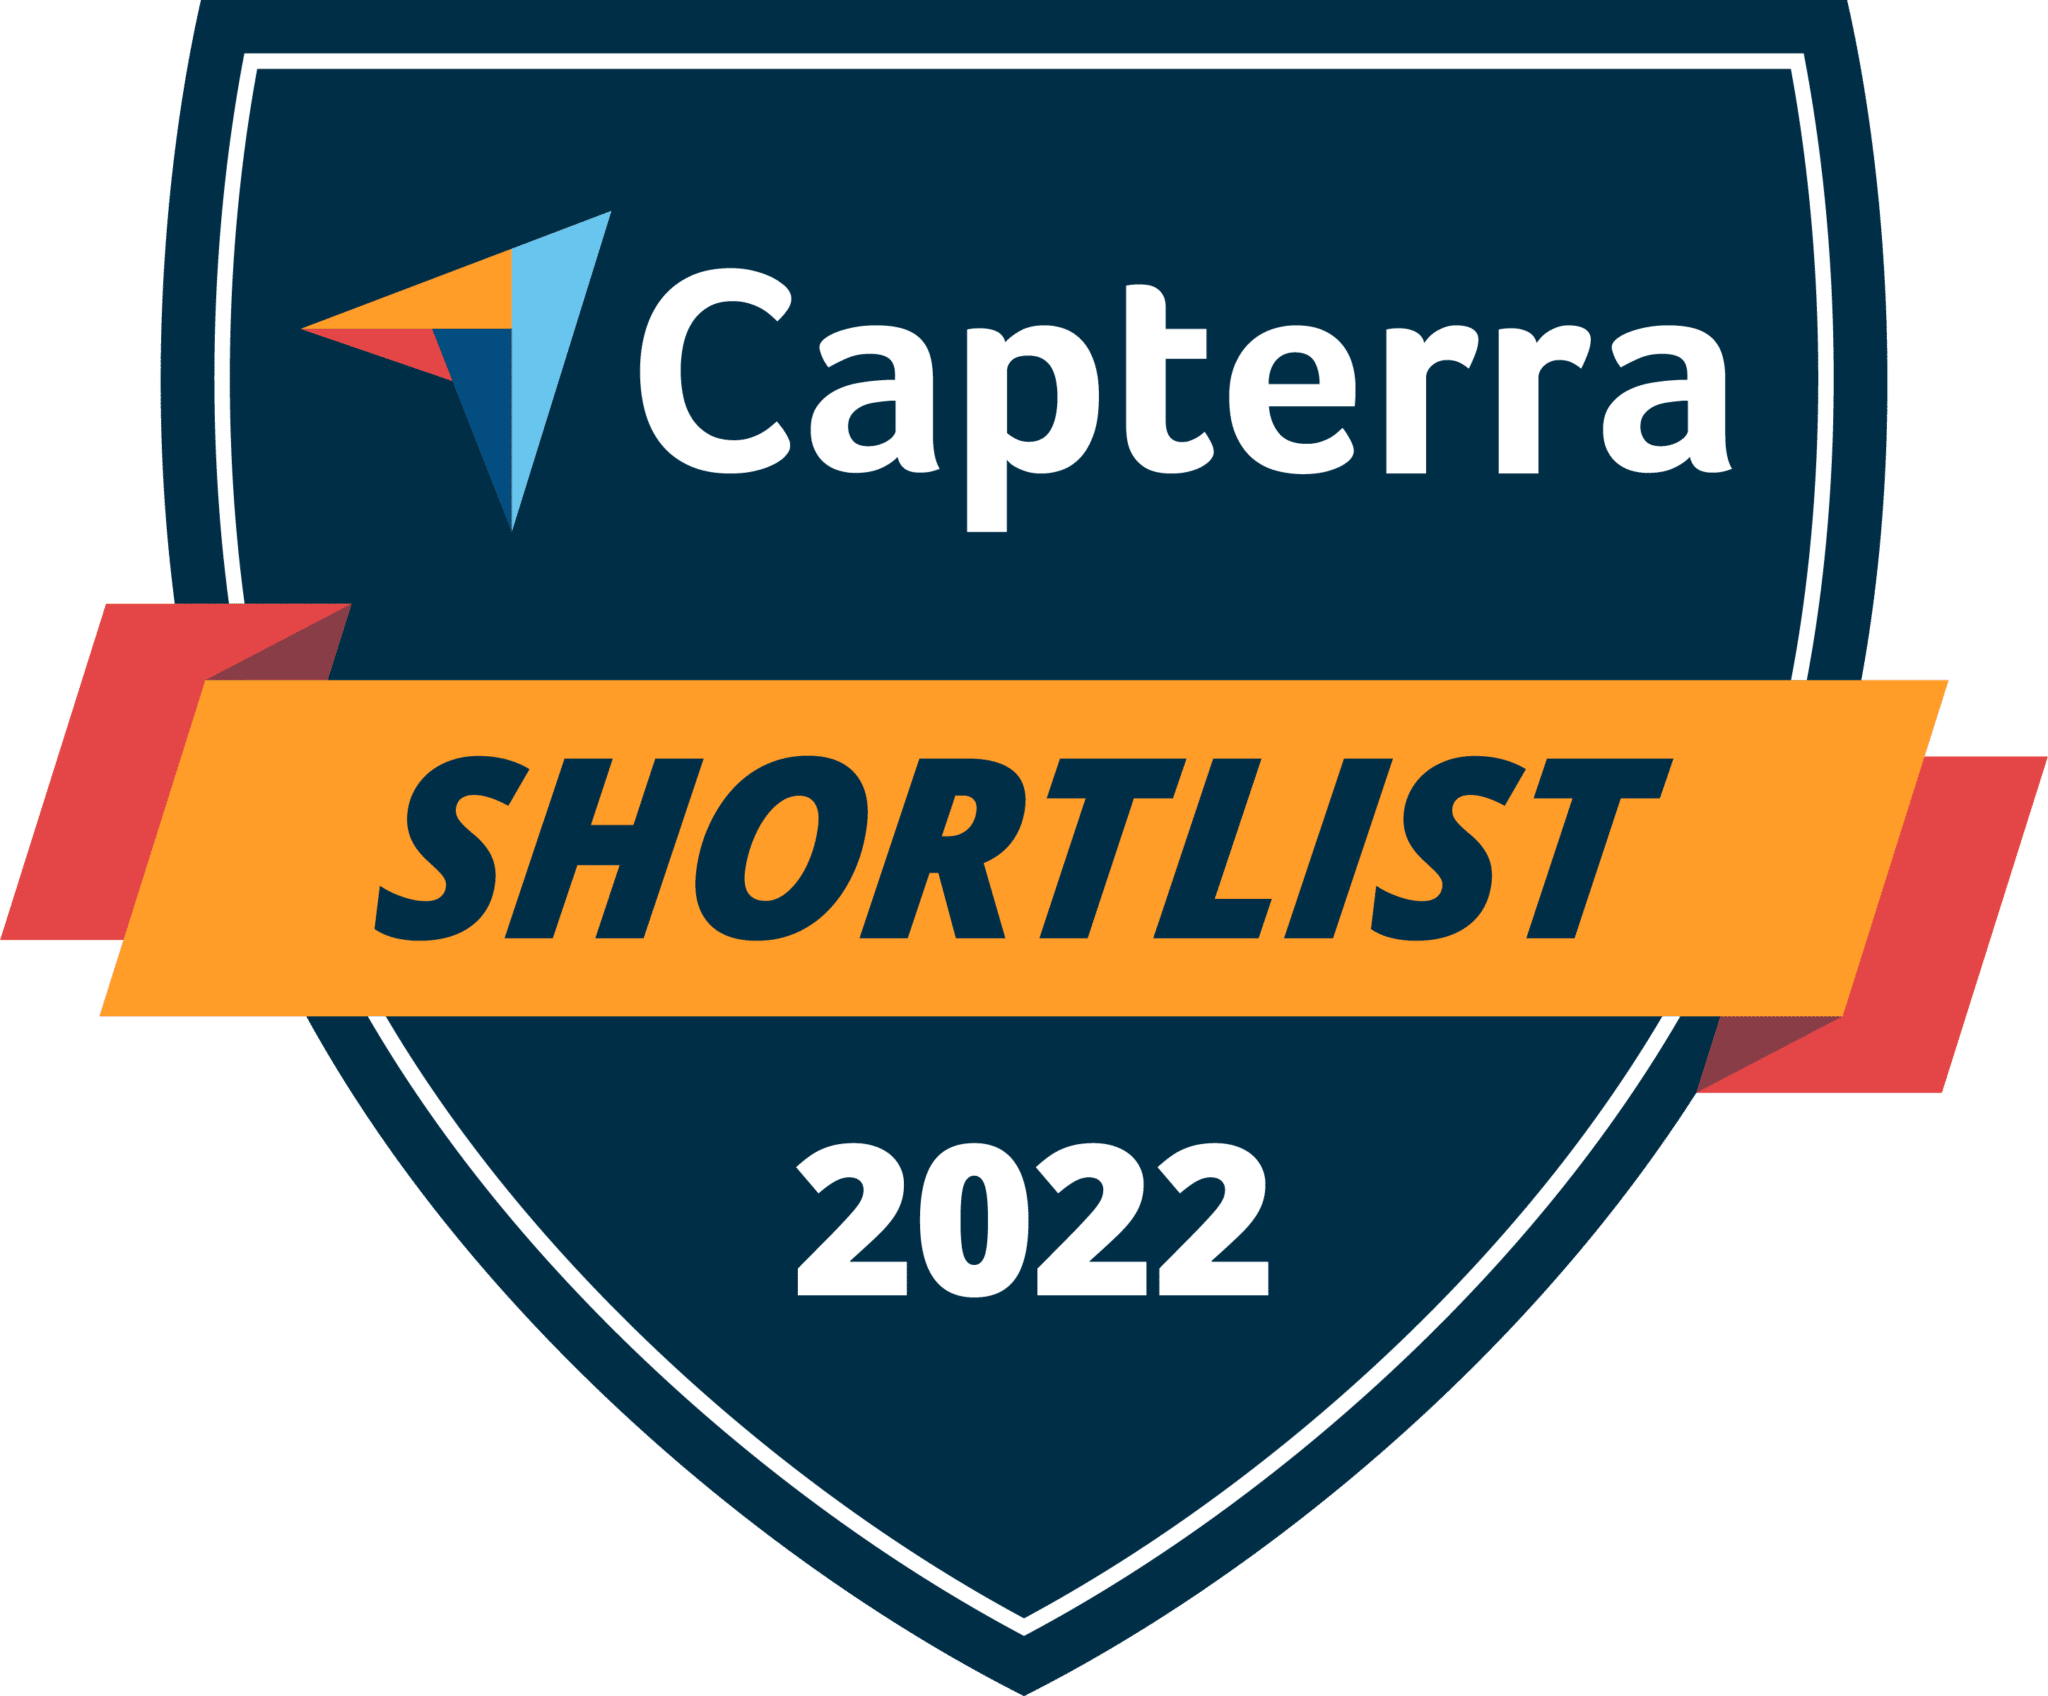 MyCase is awarded the #1 law practice management software on the 2022 Capterra Shortlist